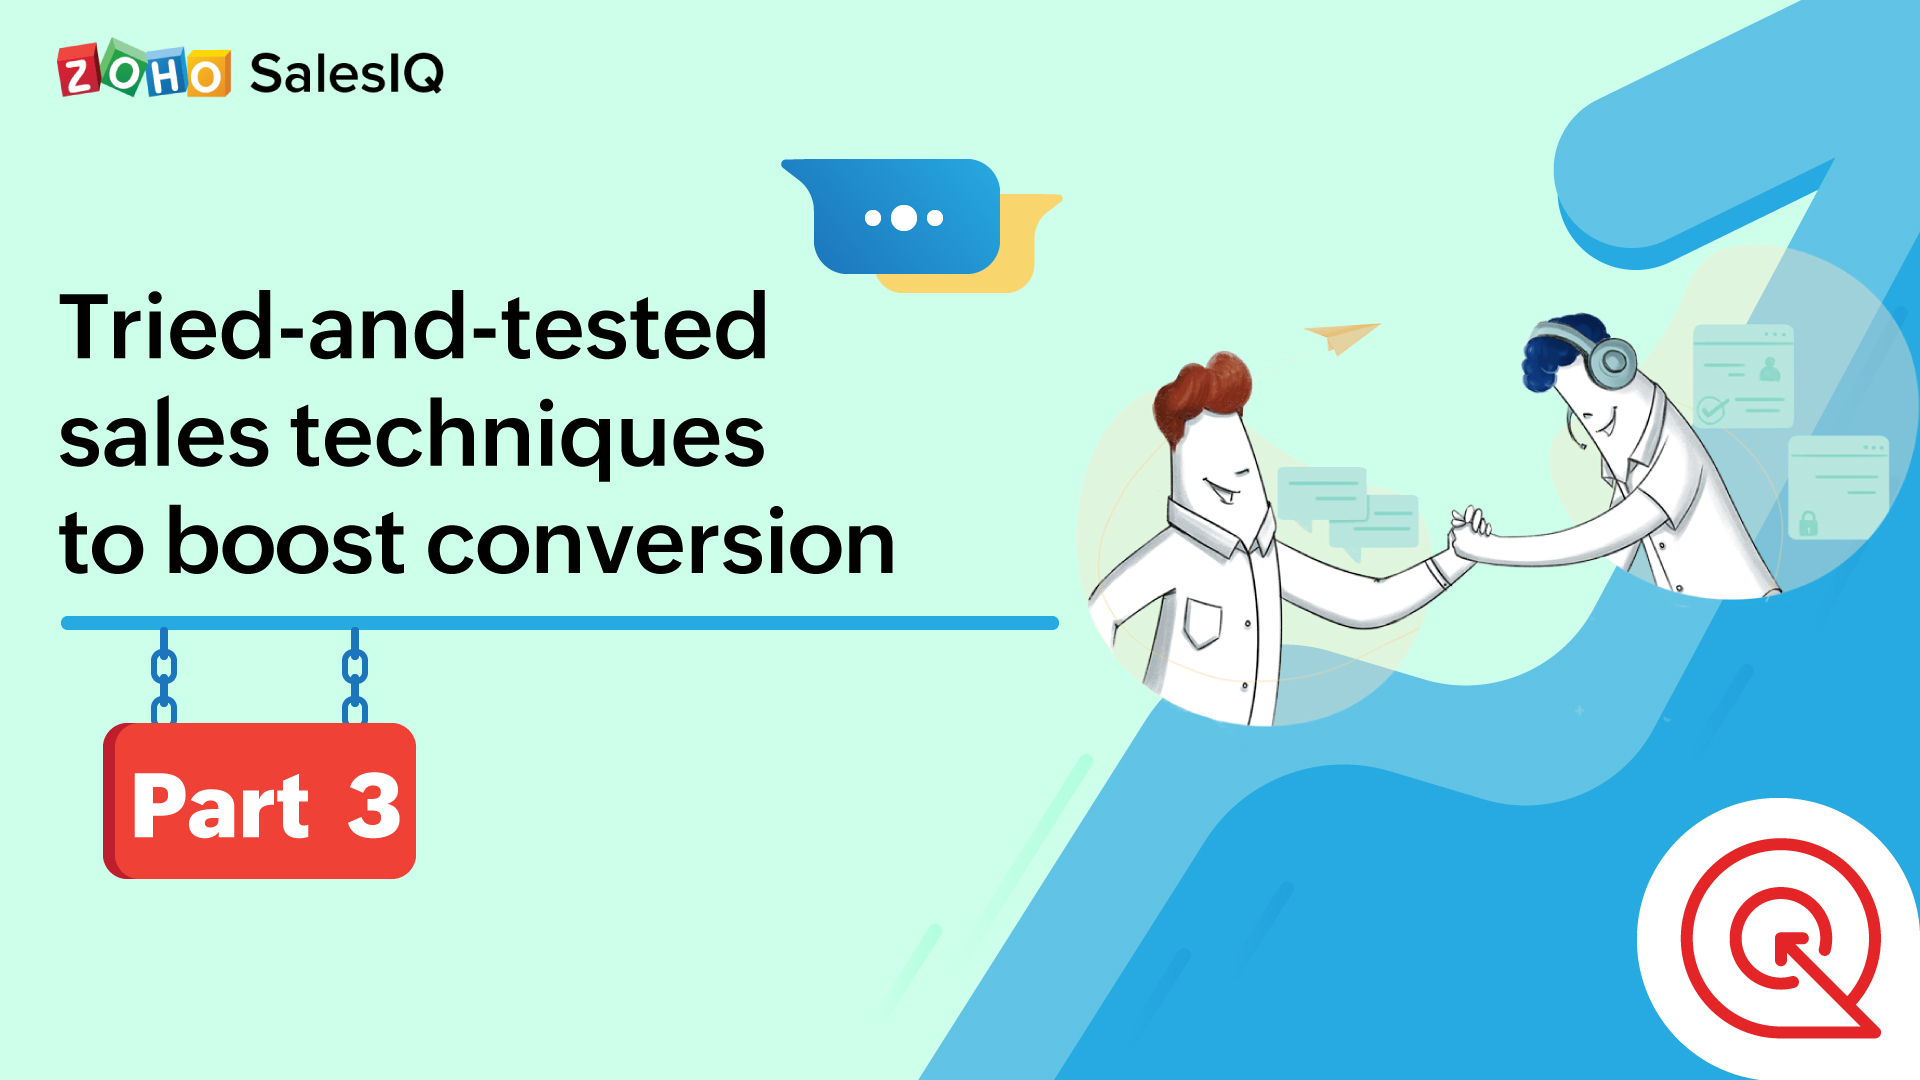 Tried-and-tested sales techniques to move leads down the sales funnel quicker: Part 3